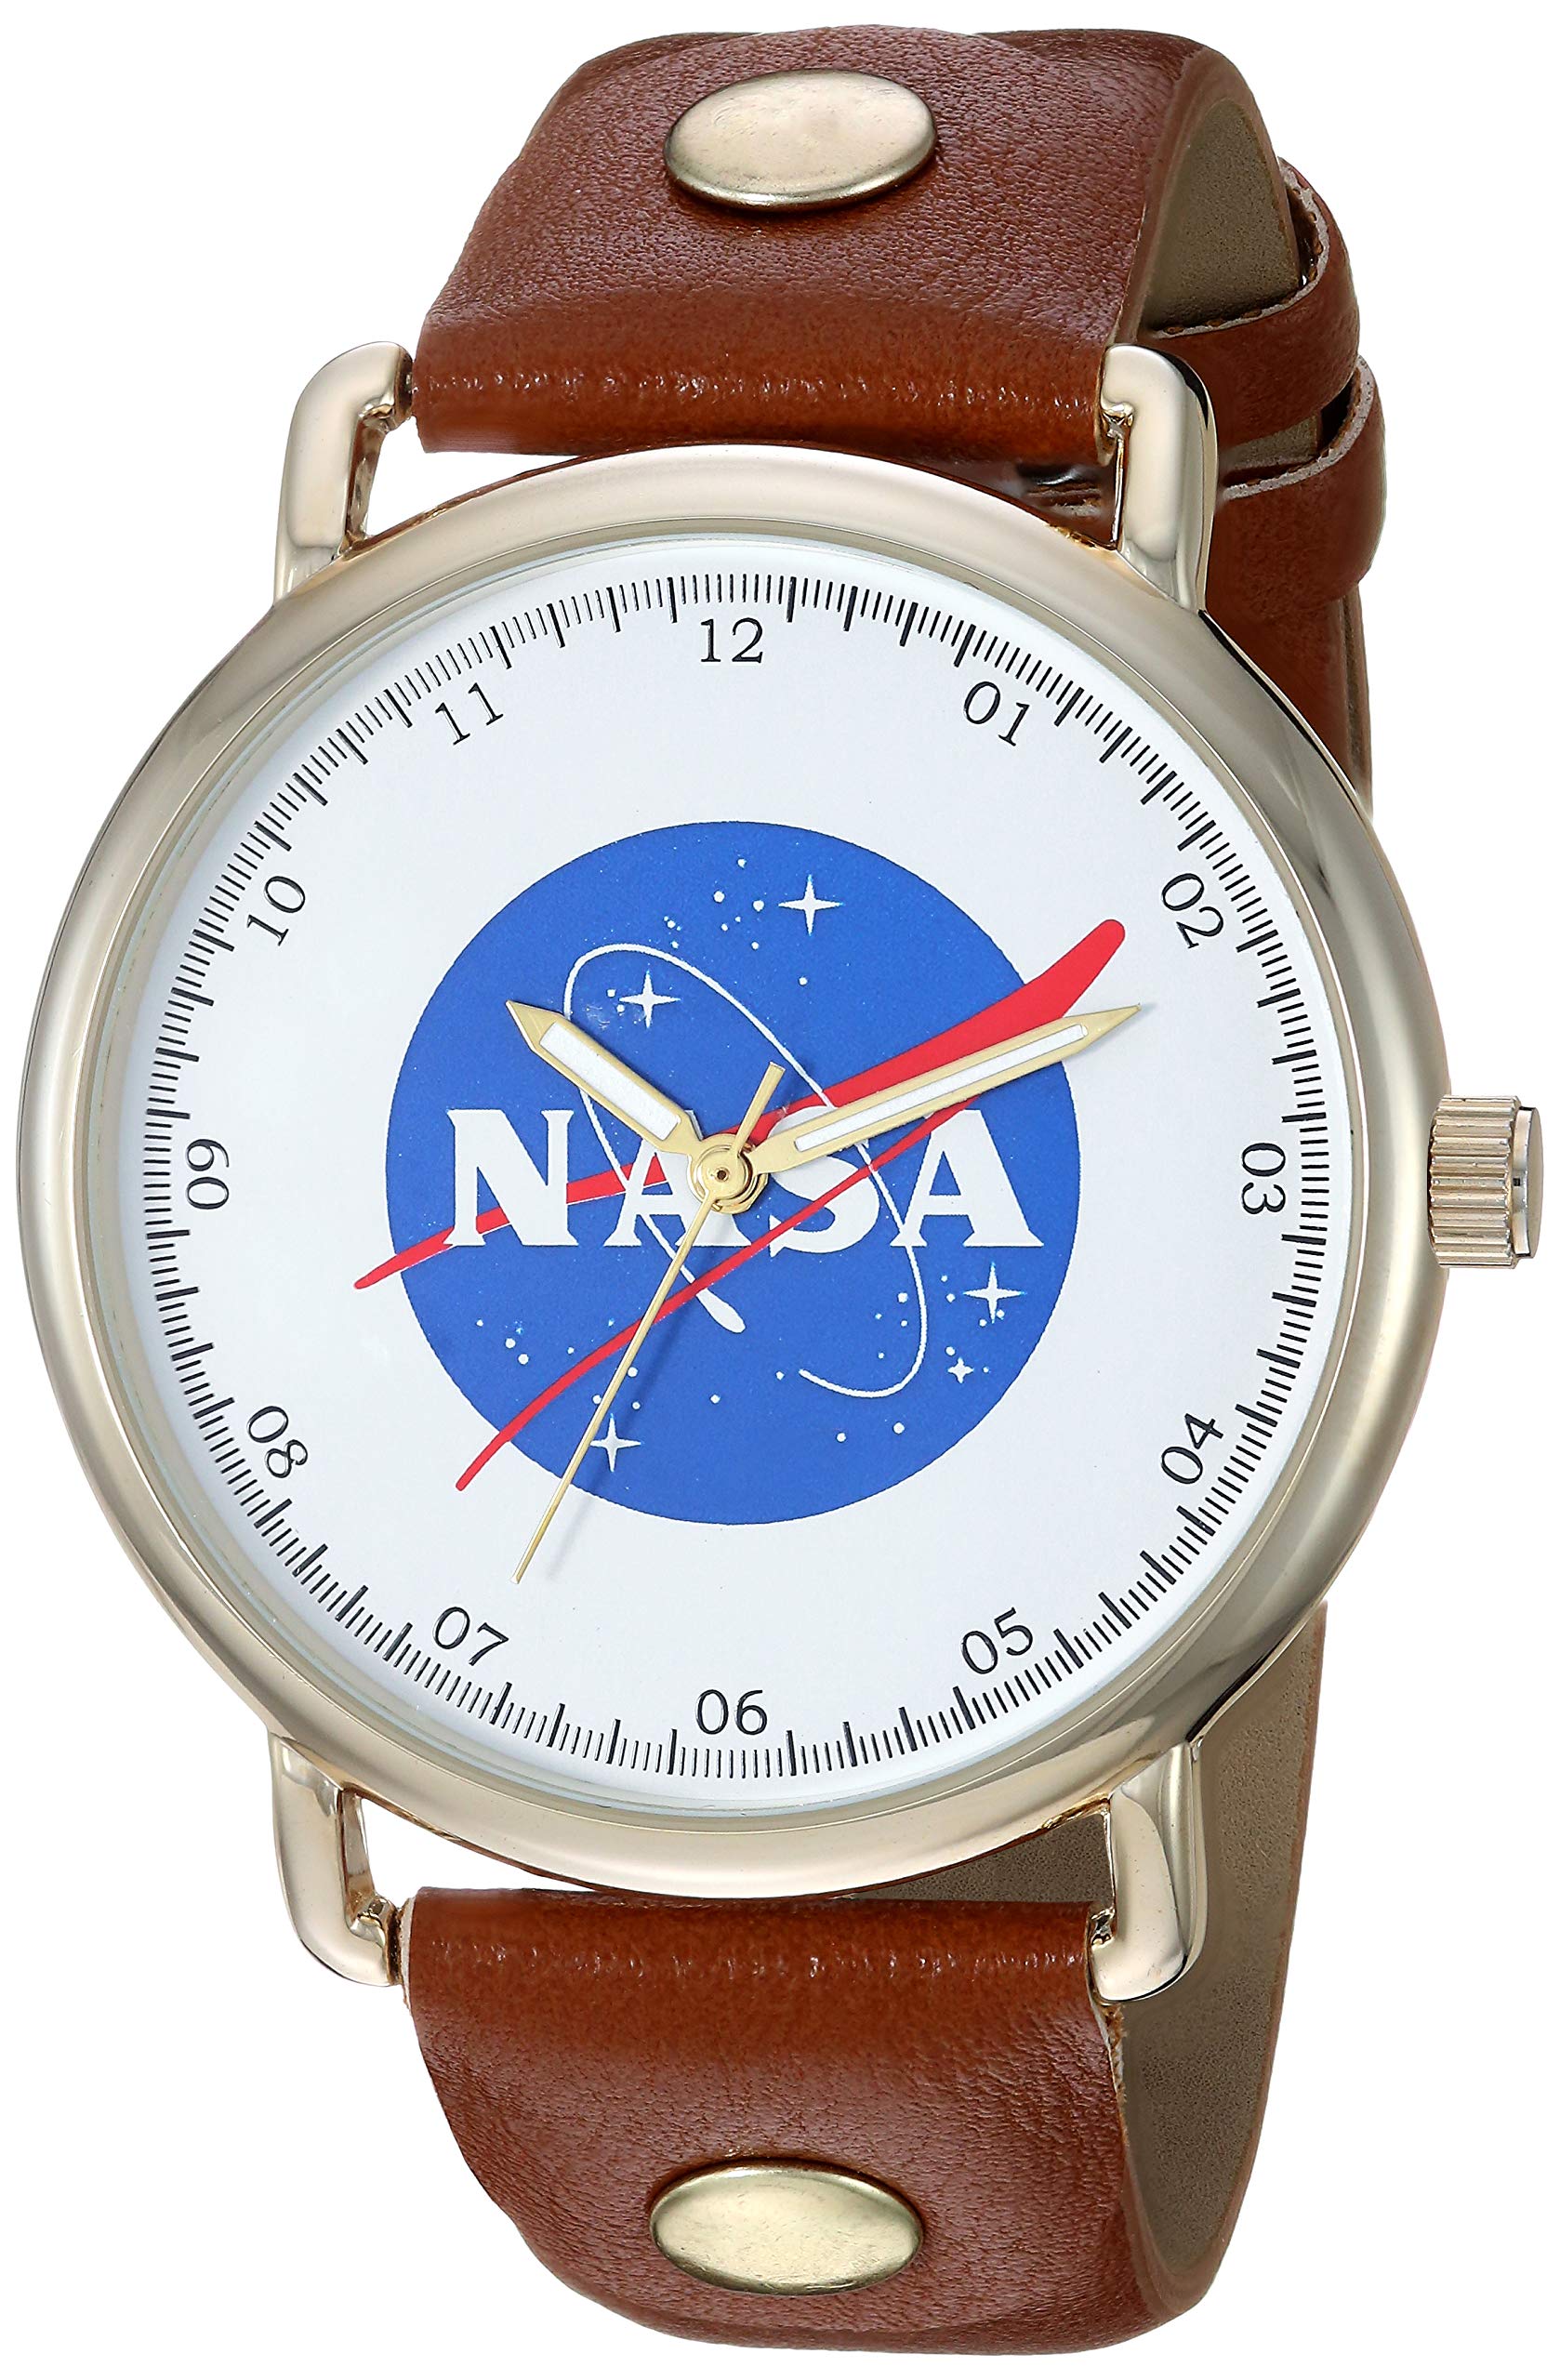 Accutime NASA Analog Quartz Wrist Watch, Cool Inexpensive Gift & Party Favor for Toddlers, Boys, Girls, Adults